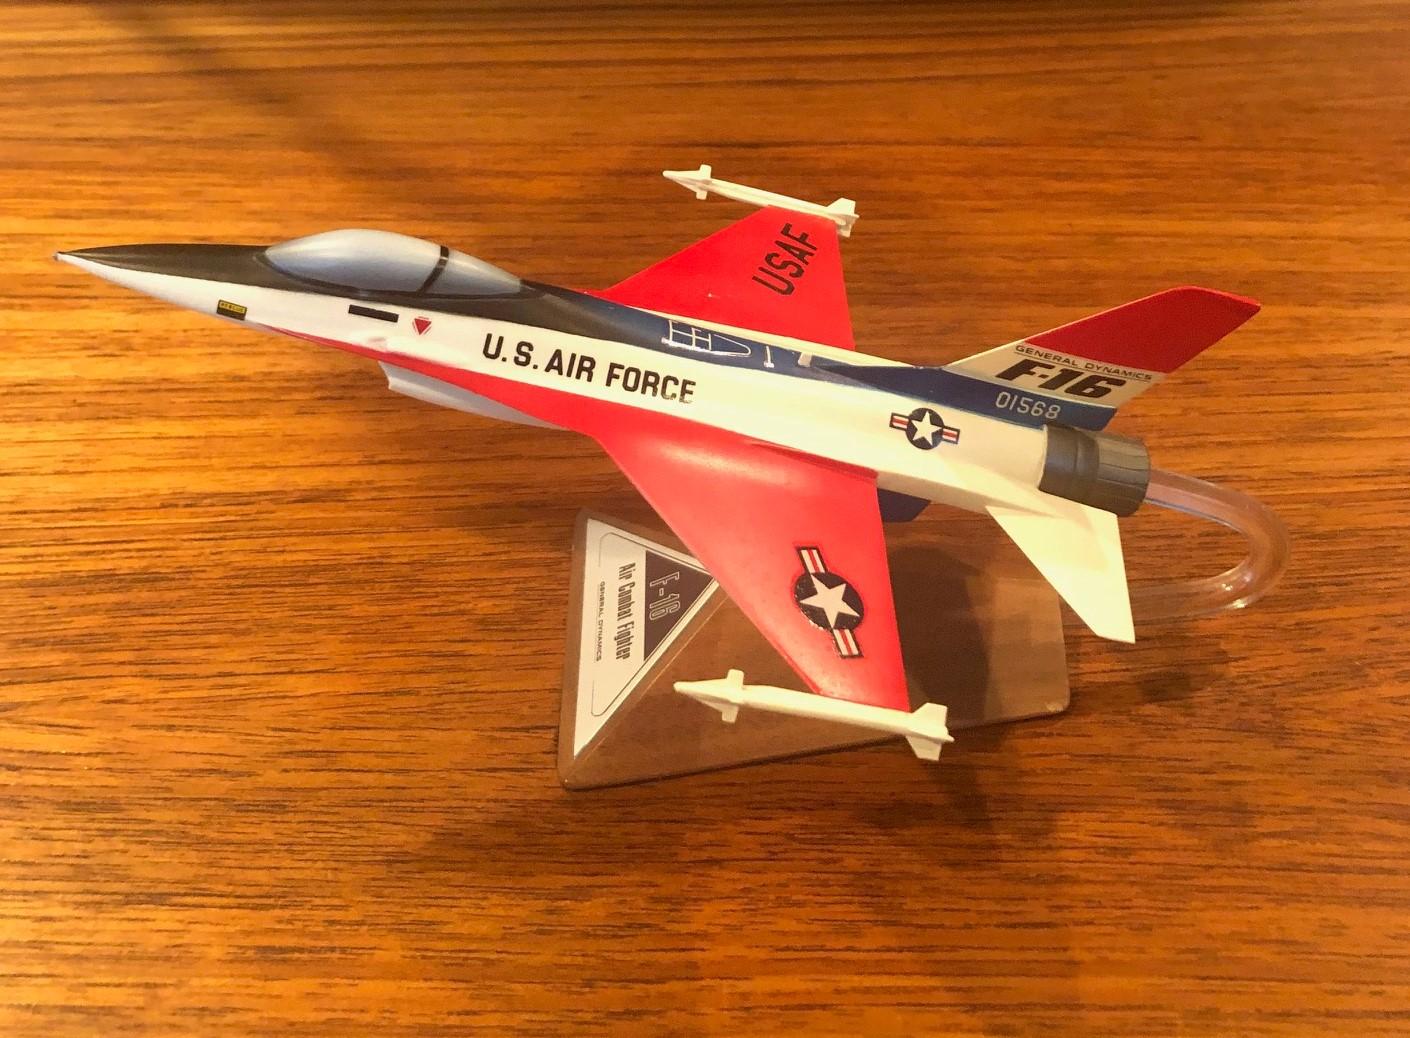 Philippine U.S. Air Force F-16 Air Combat Fighter Contractor Desk Model